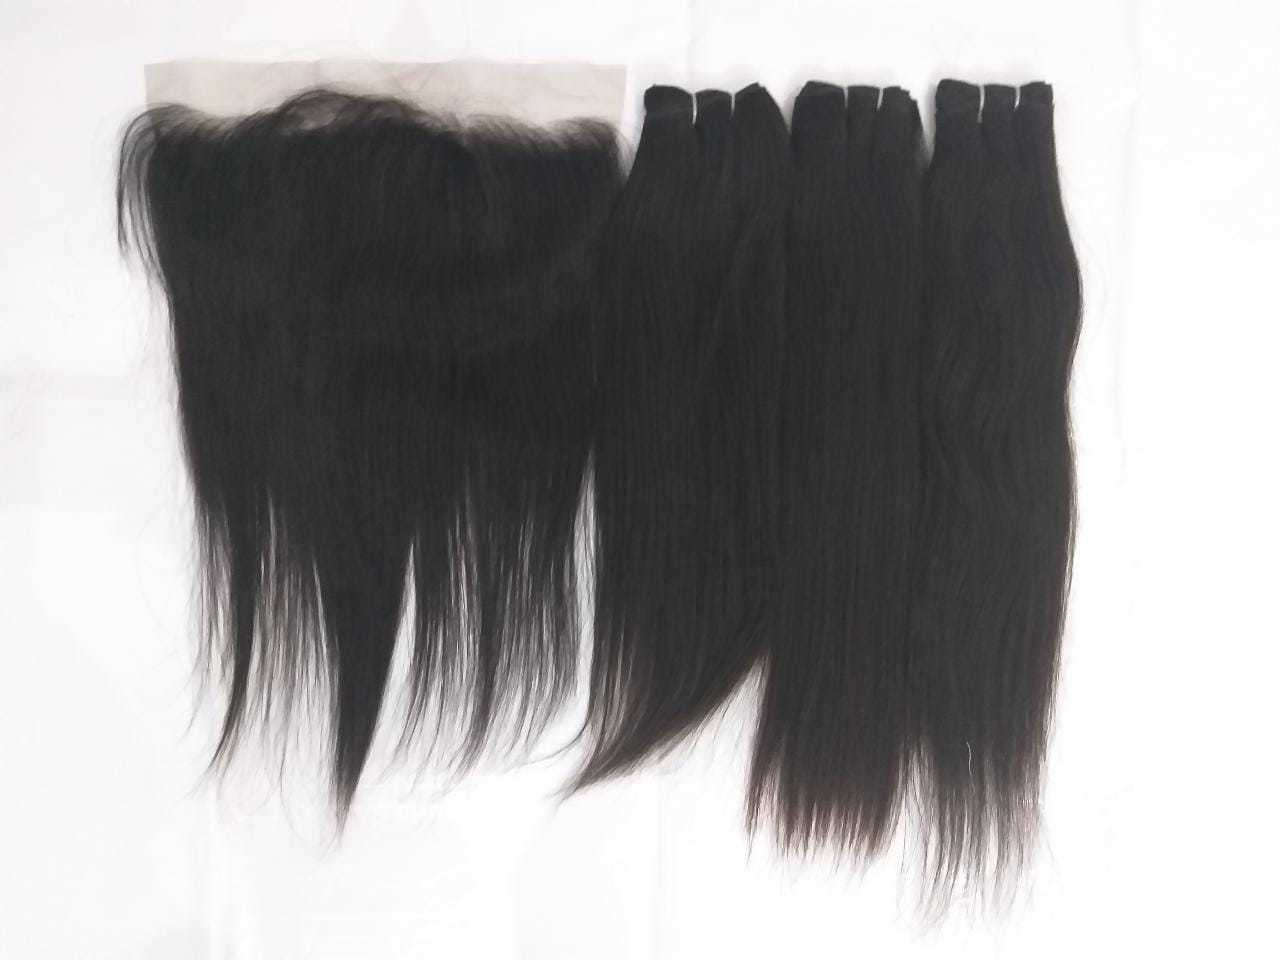 Best straight hair extensions